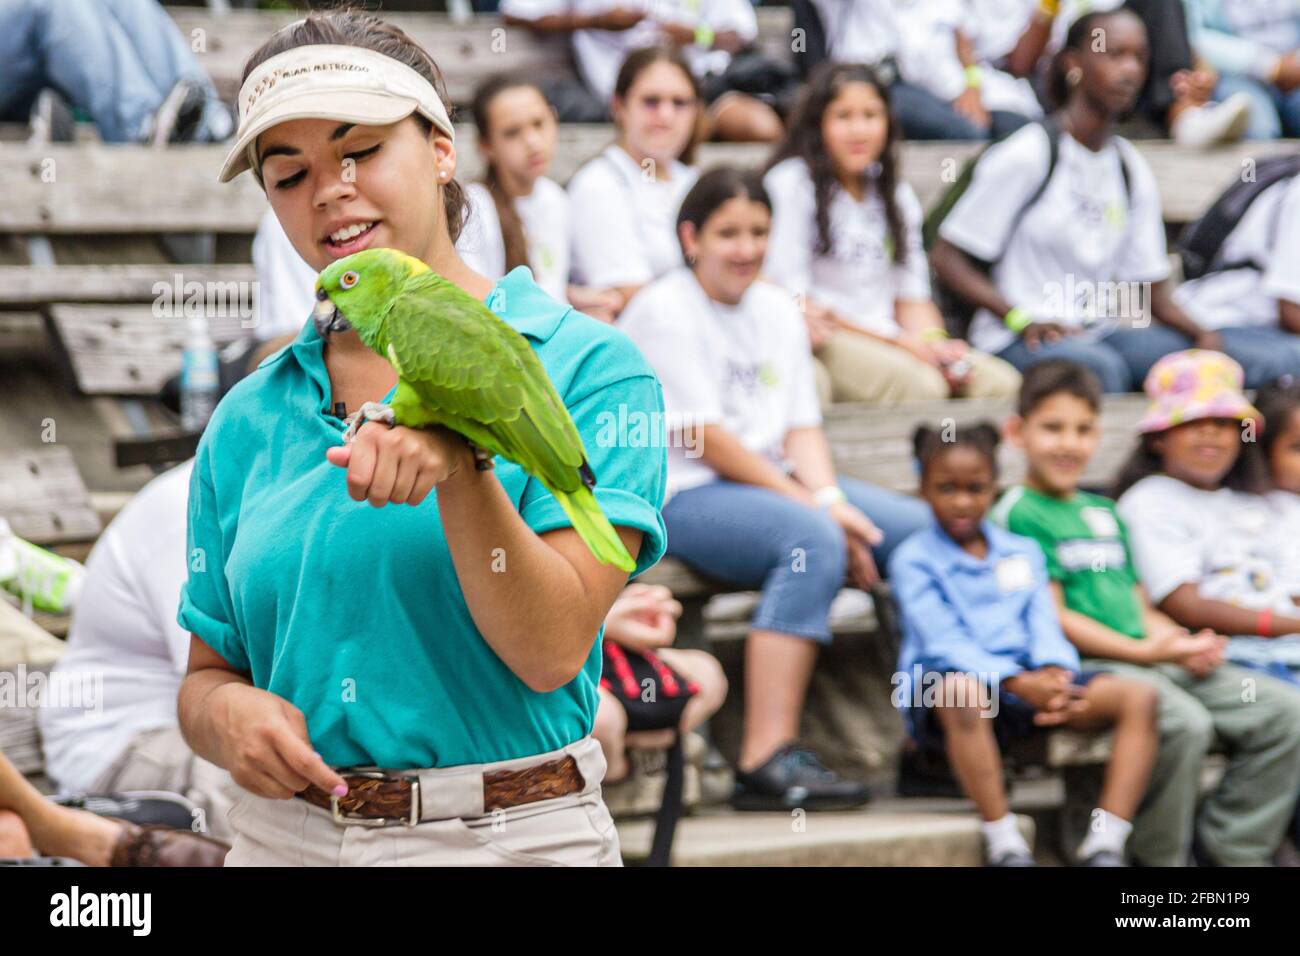 Miami Florida, Metrozoo Metro Zoo Drug Free Youth in Town, DFYIT adolescents adolescents adolescents adolescents adolescents adolescents étudiants adolescents, classe voyage amphithéâtre wi Banque D'Images